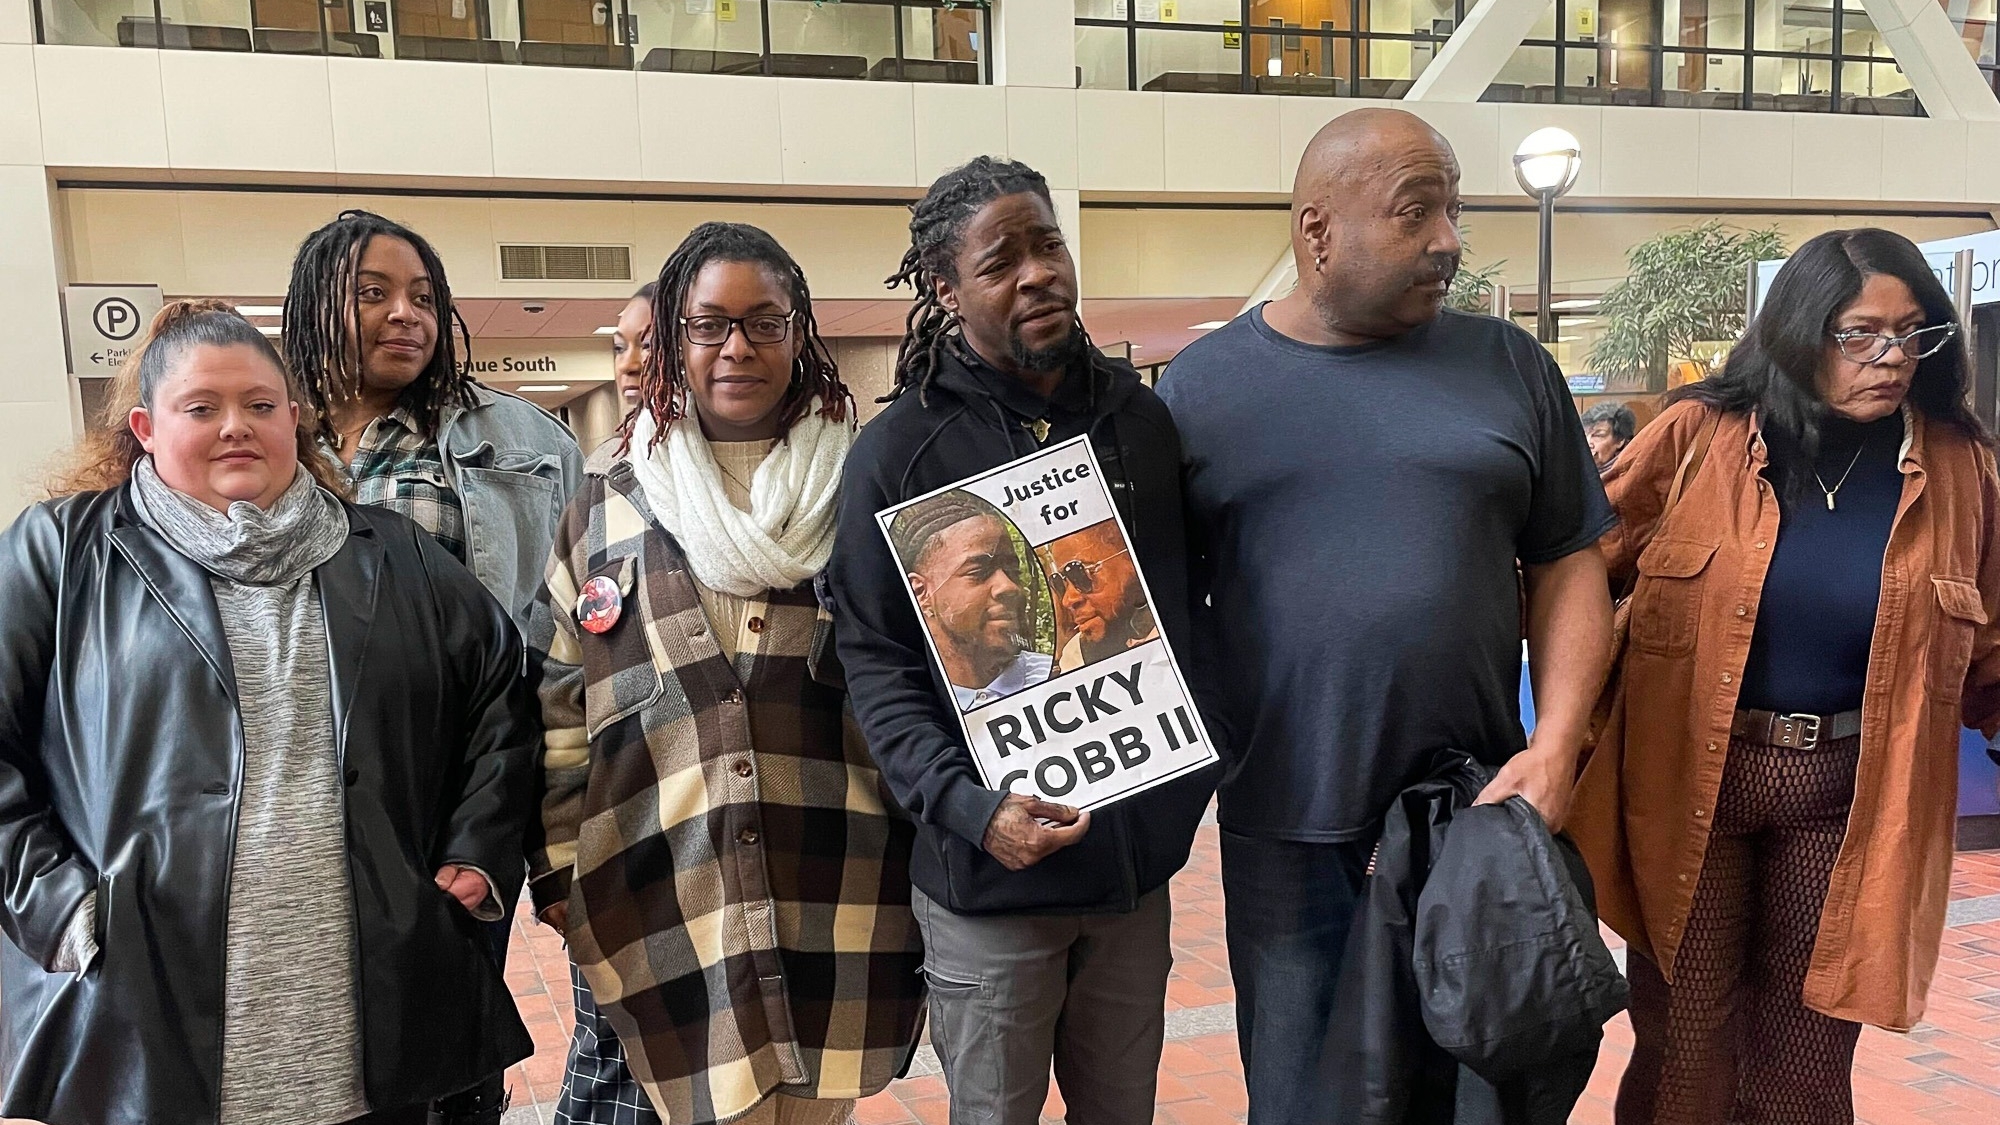 Family and activists for Ricky Cobb II, who was fatally shot by a Minnesota state trooper in a July 2023 traffic stop, stand with a sign that shows photos of Cobb and says "Justice for Ricky Cobb II" inside Hennepin County Government Center in Minneapolis, Minn., on Thursday, Jan. 25, 2024. (AP Photo/Trisha Ahmed)